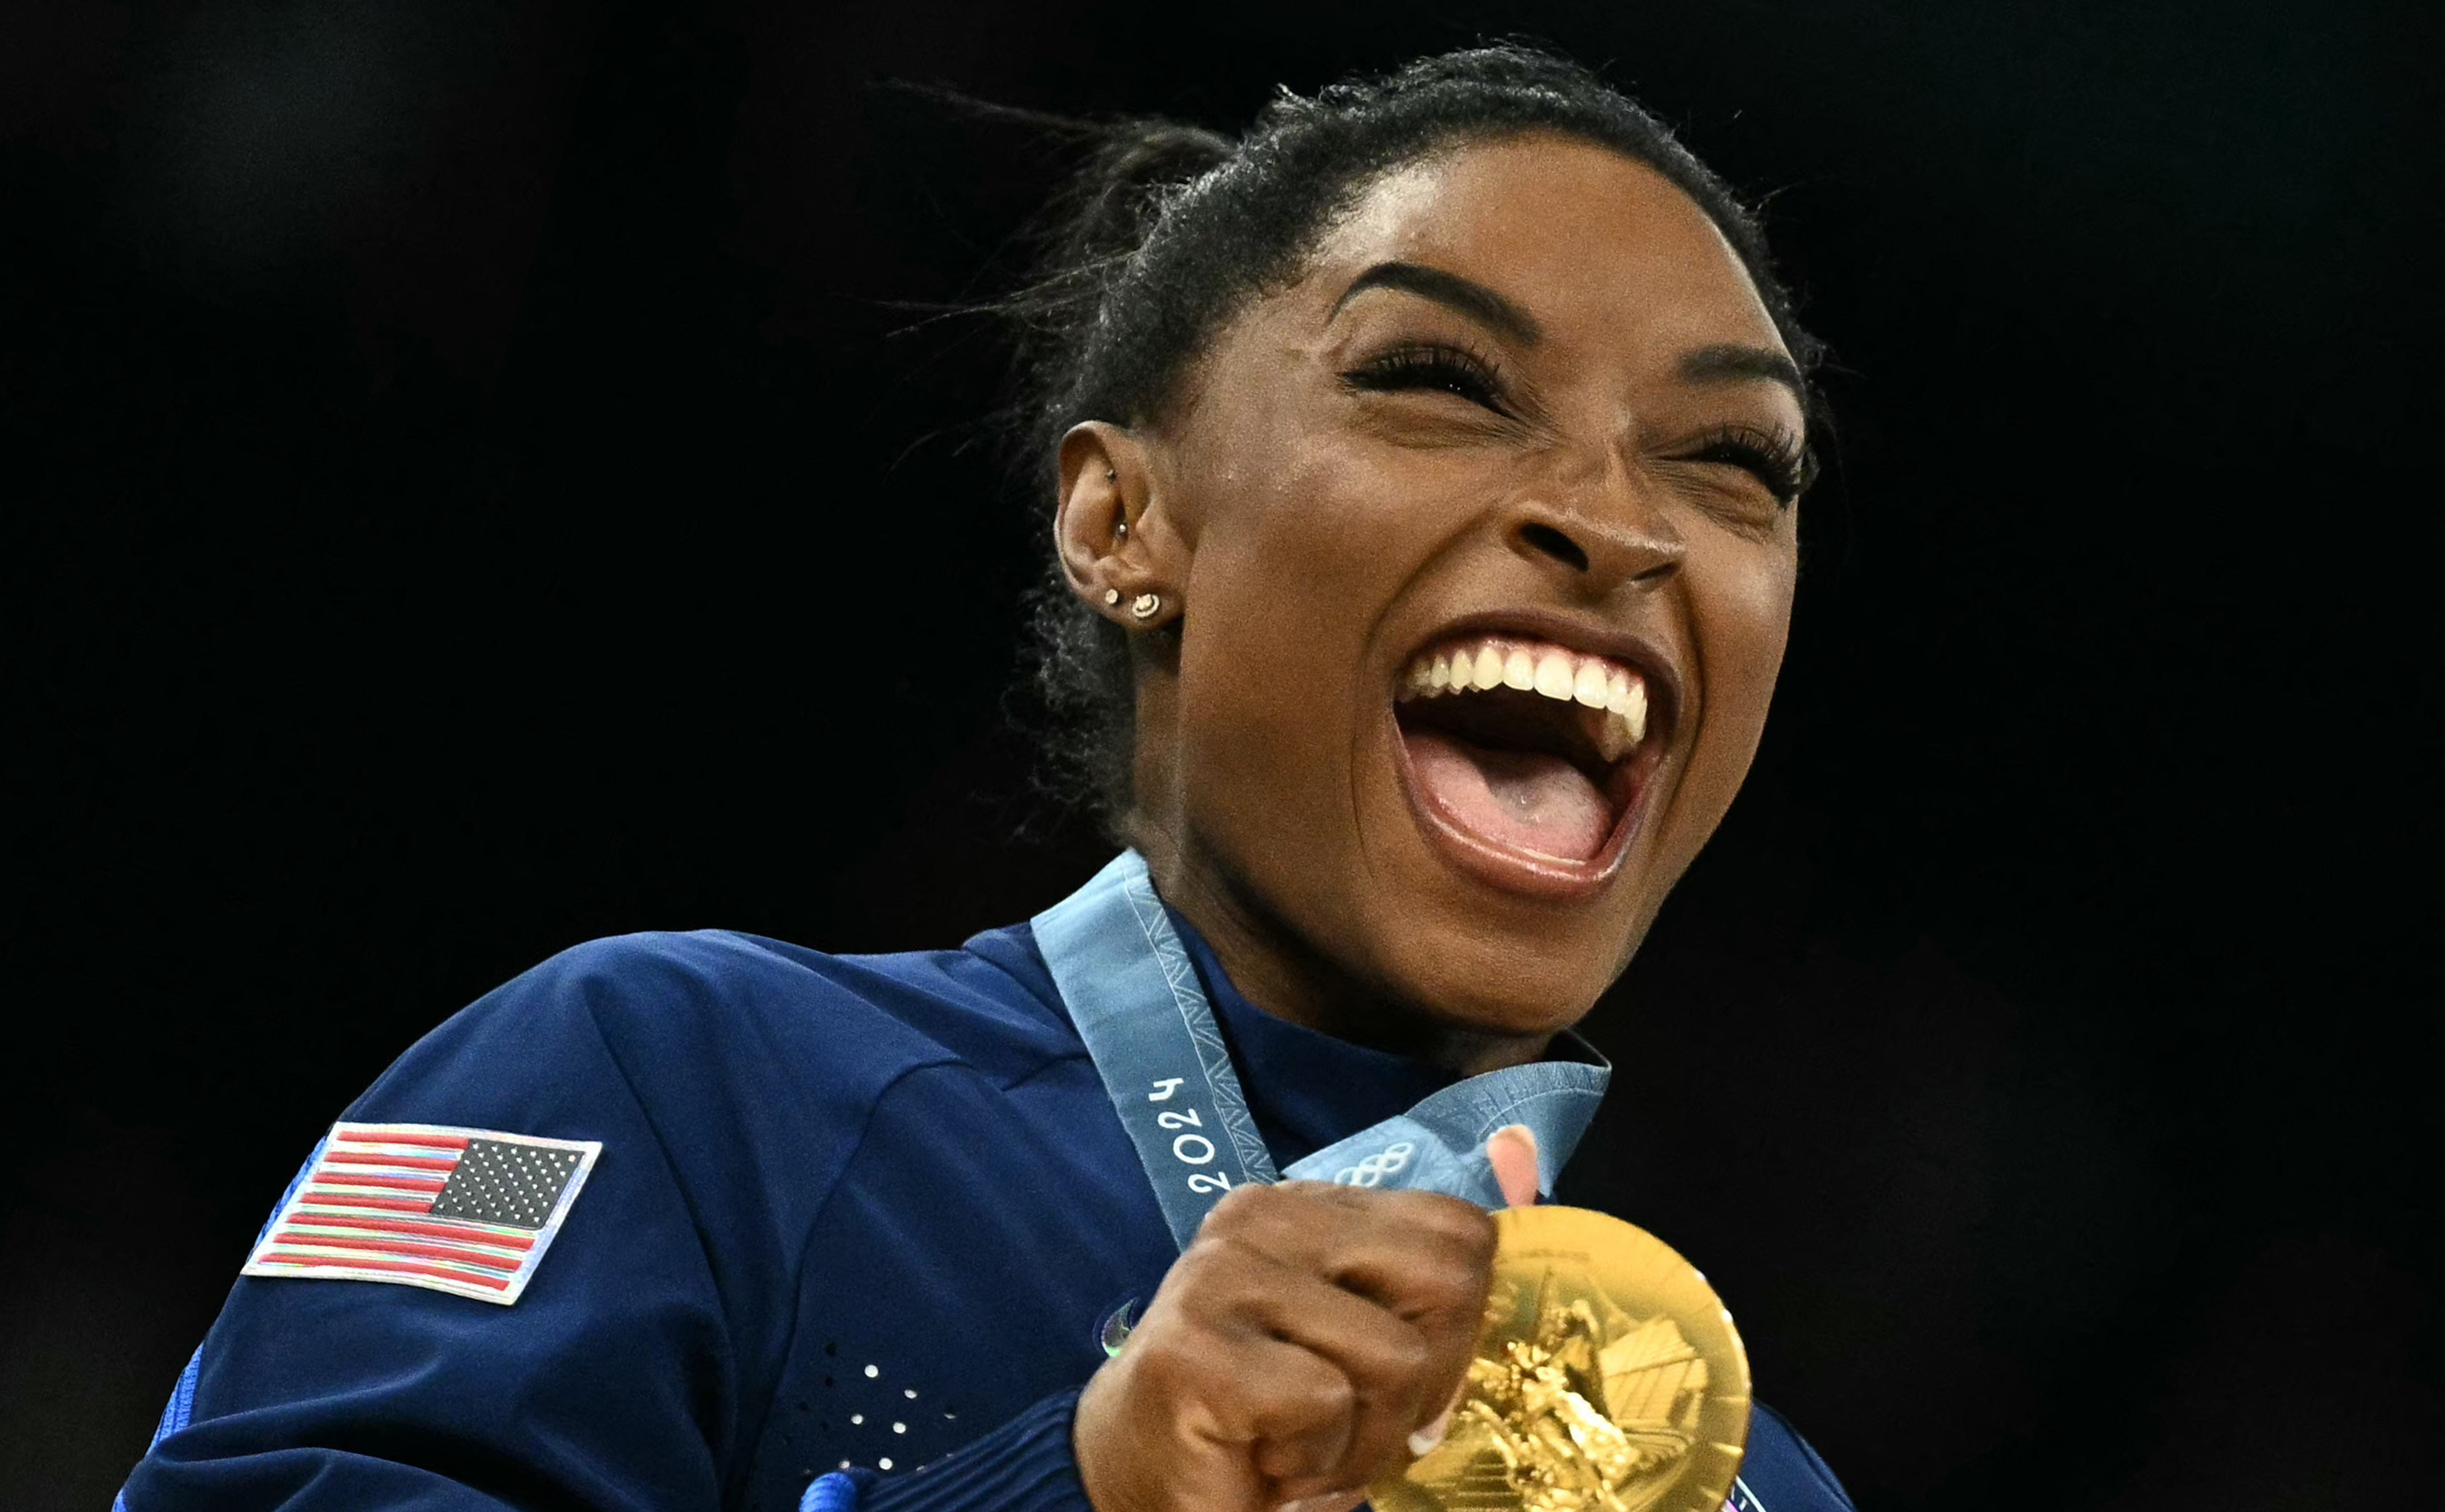 Simone Biles won the Olympic gold for dominating the MyKayla Skinner beef